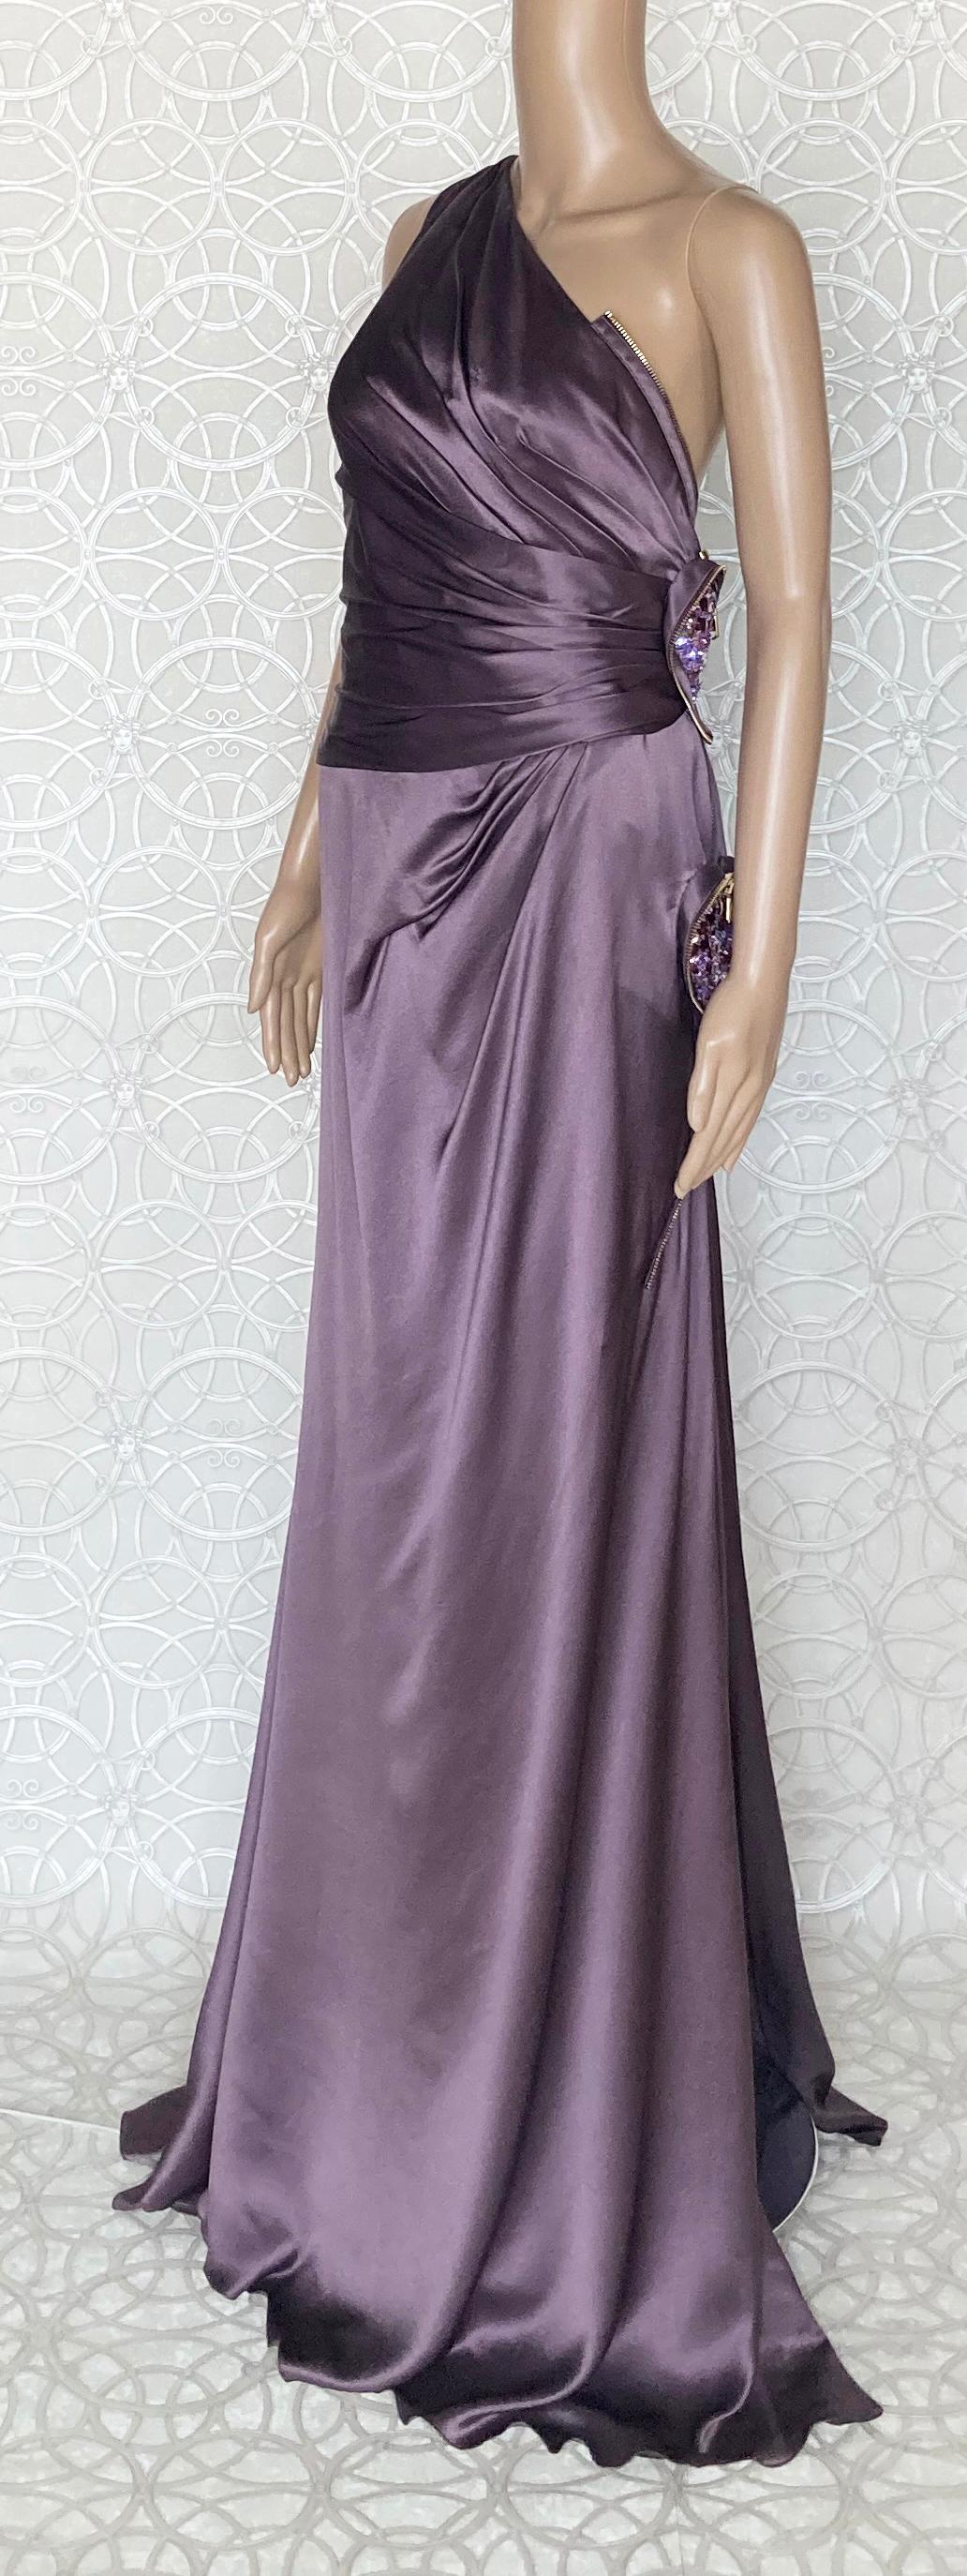 Black S/S 2009 L# 37 VERSACE ONE SHOULDER PURPLE LONG DRESS GOWN With HEARTS 46 - 10 For Sale